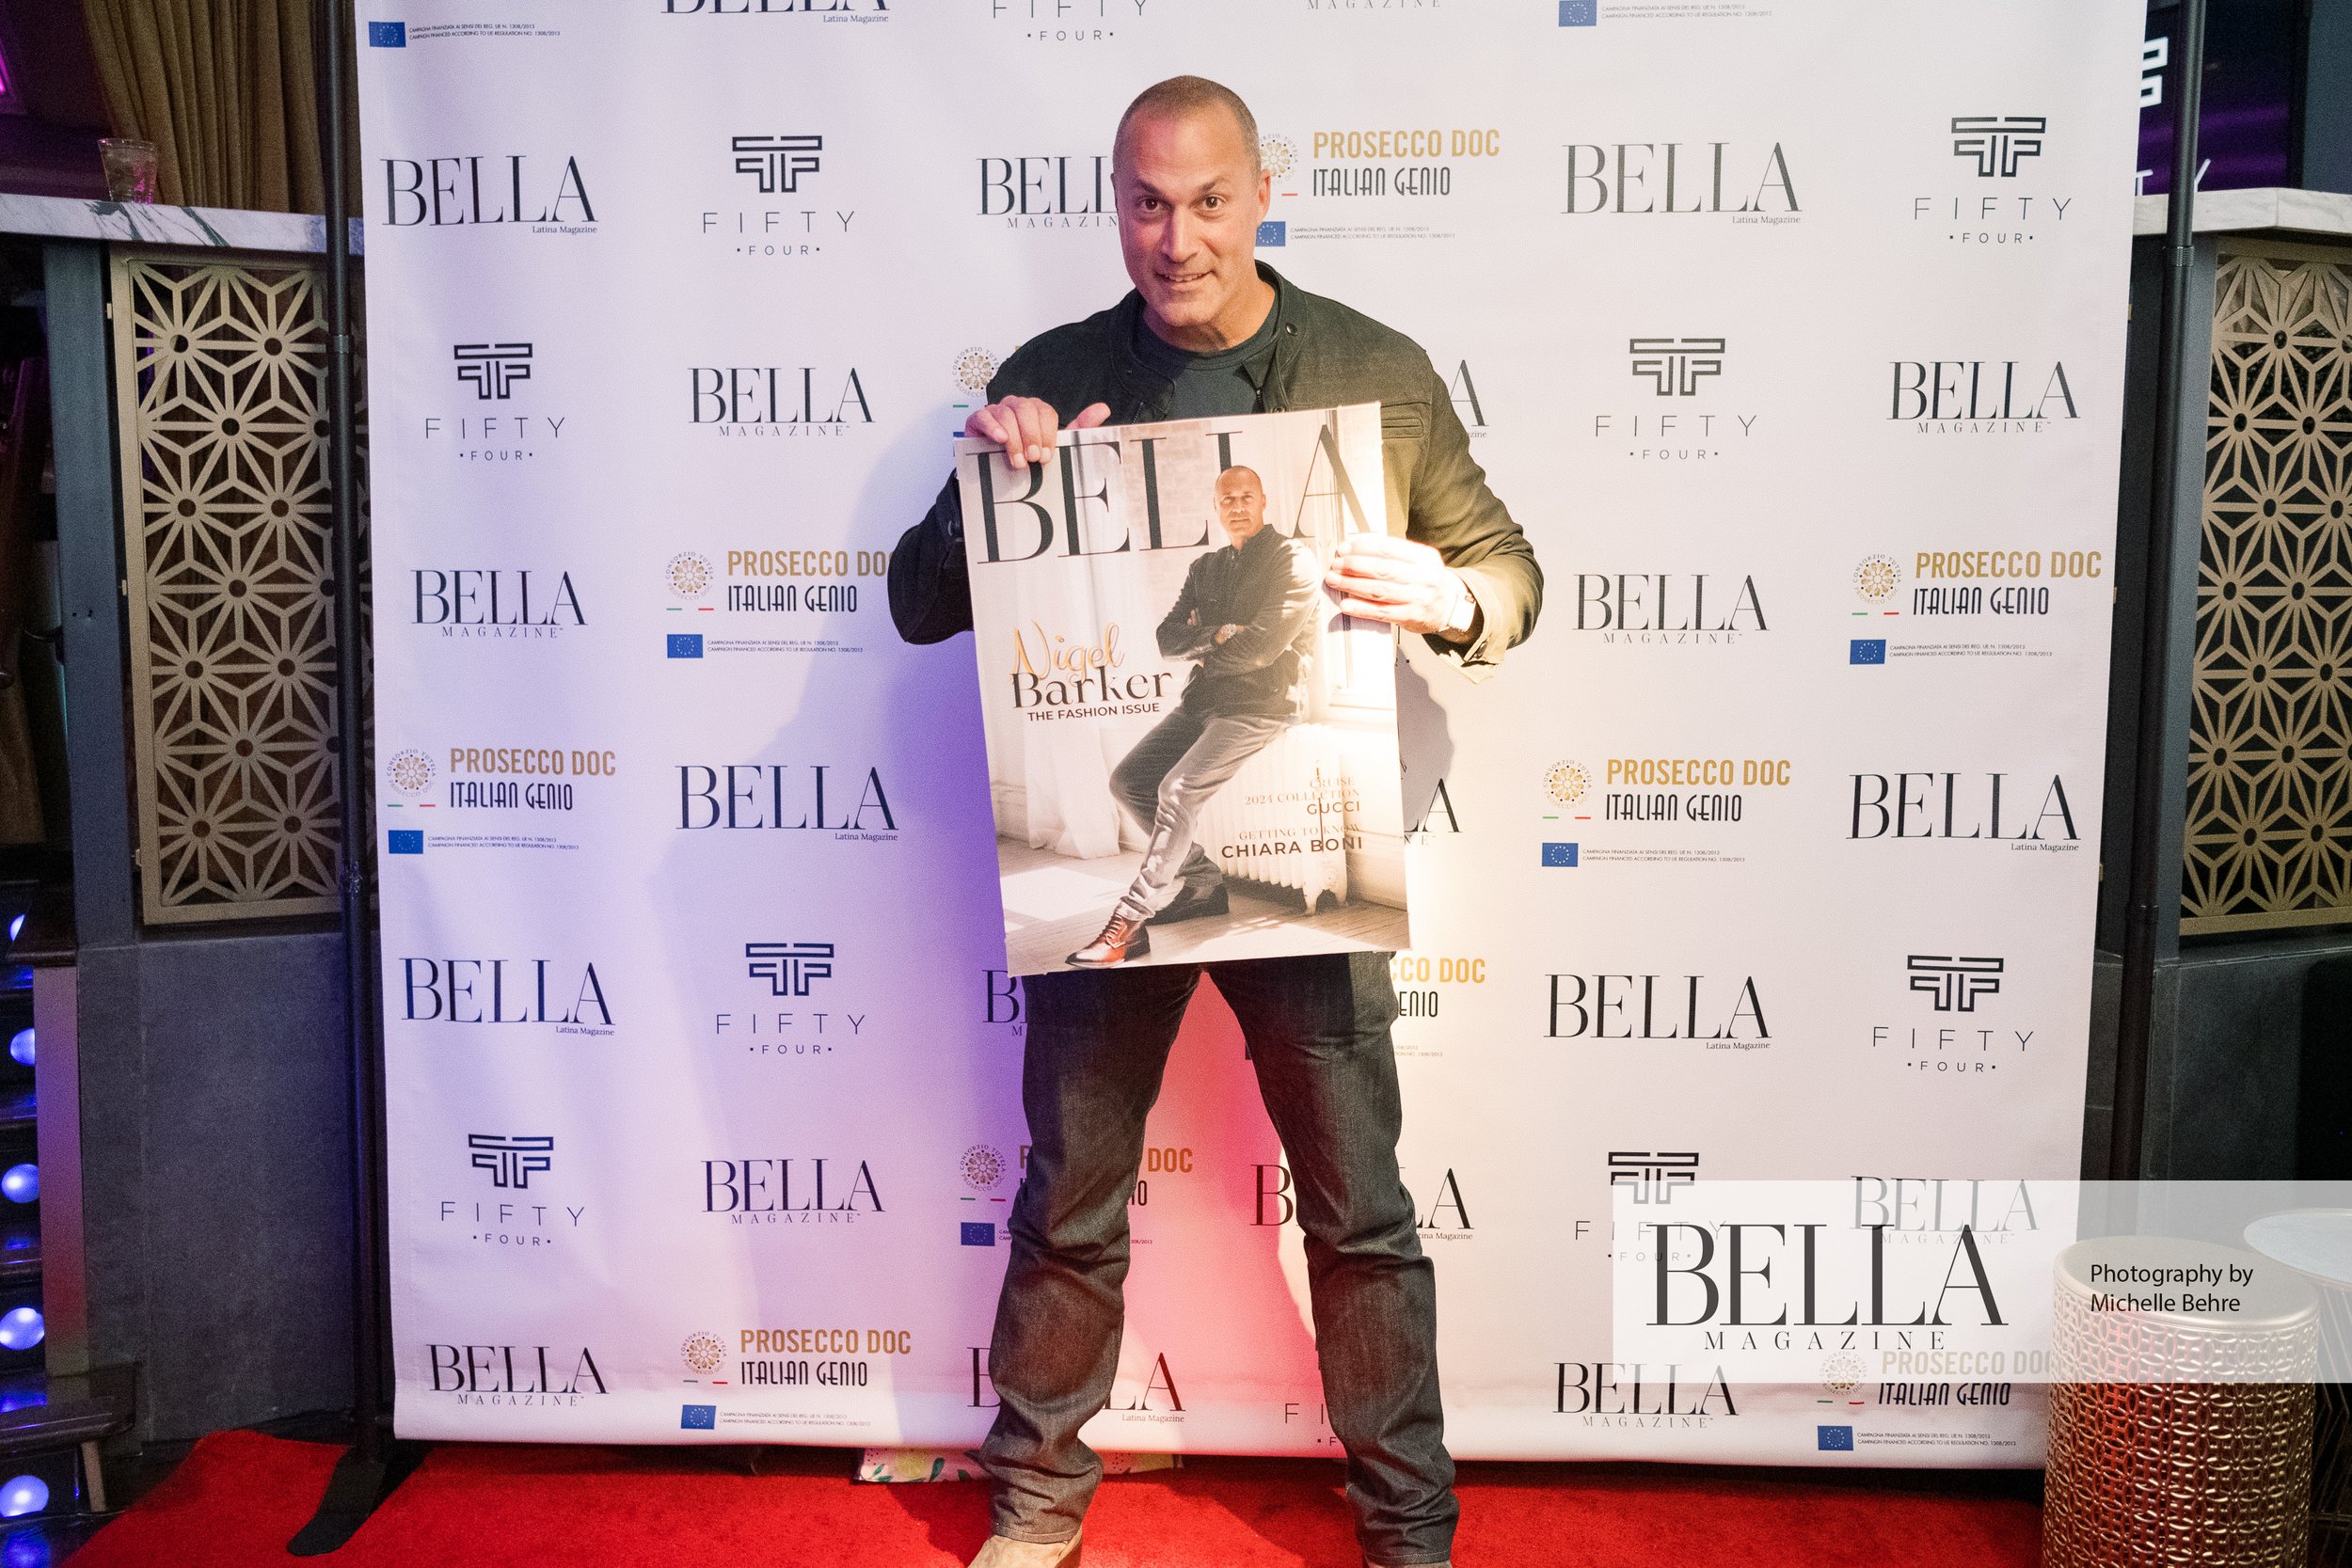 BELLA-Magazine-September-Issue-Cover-Event-Fifty-Four-121 2.jpg